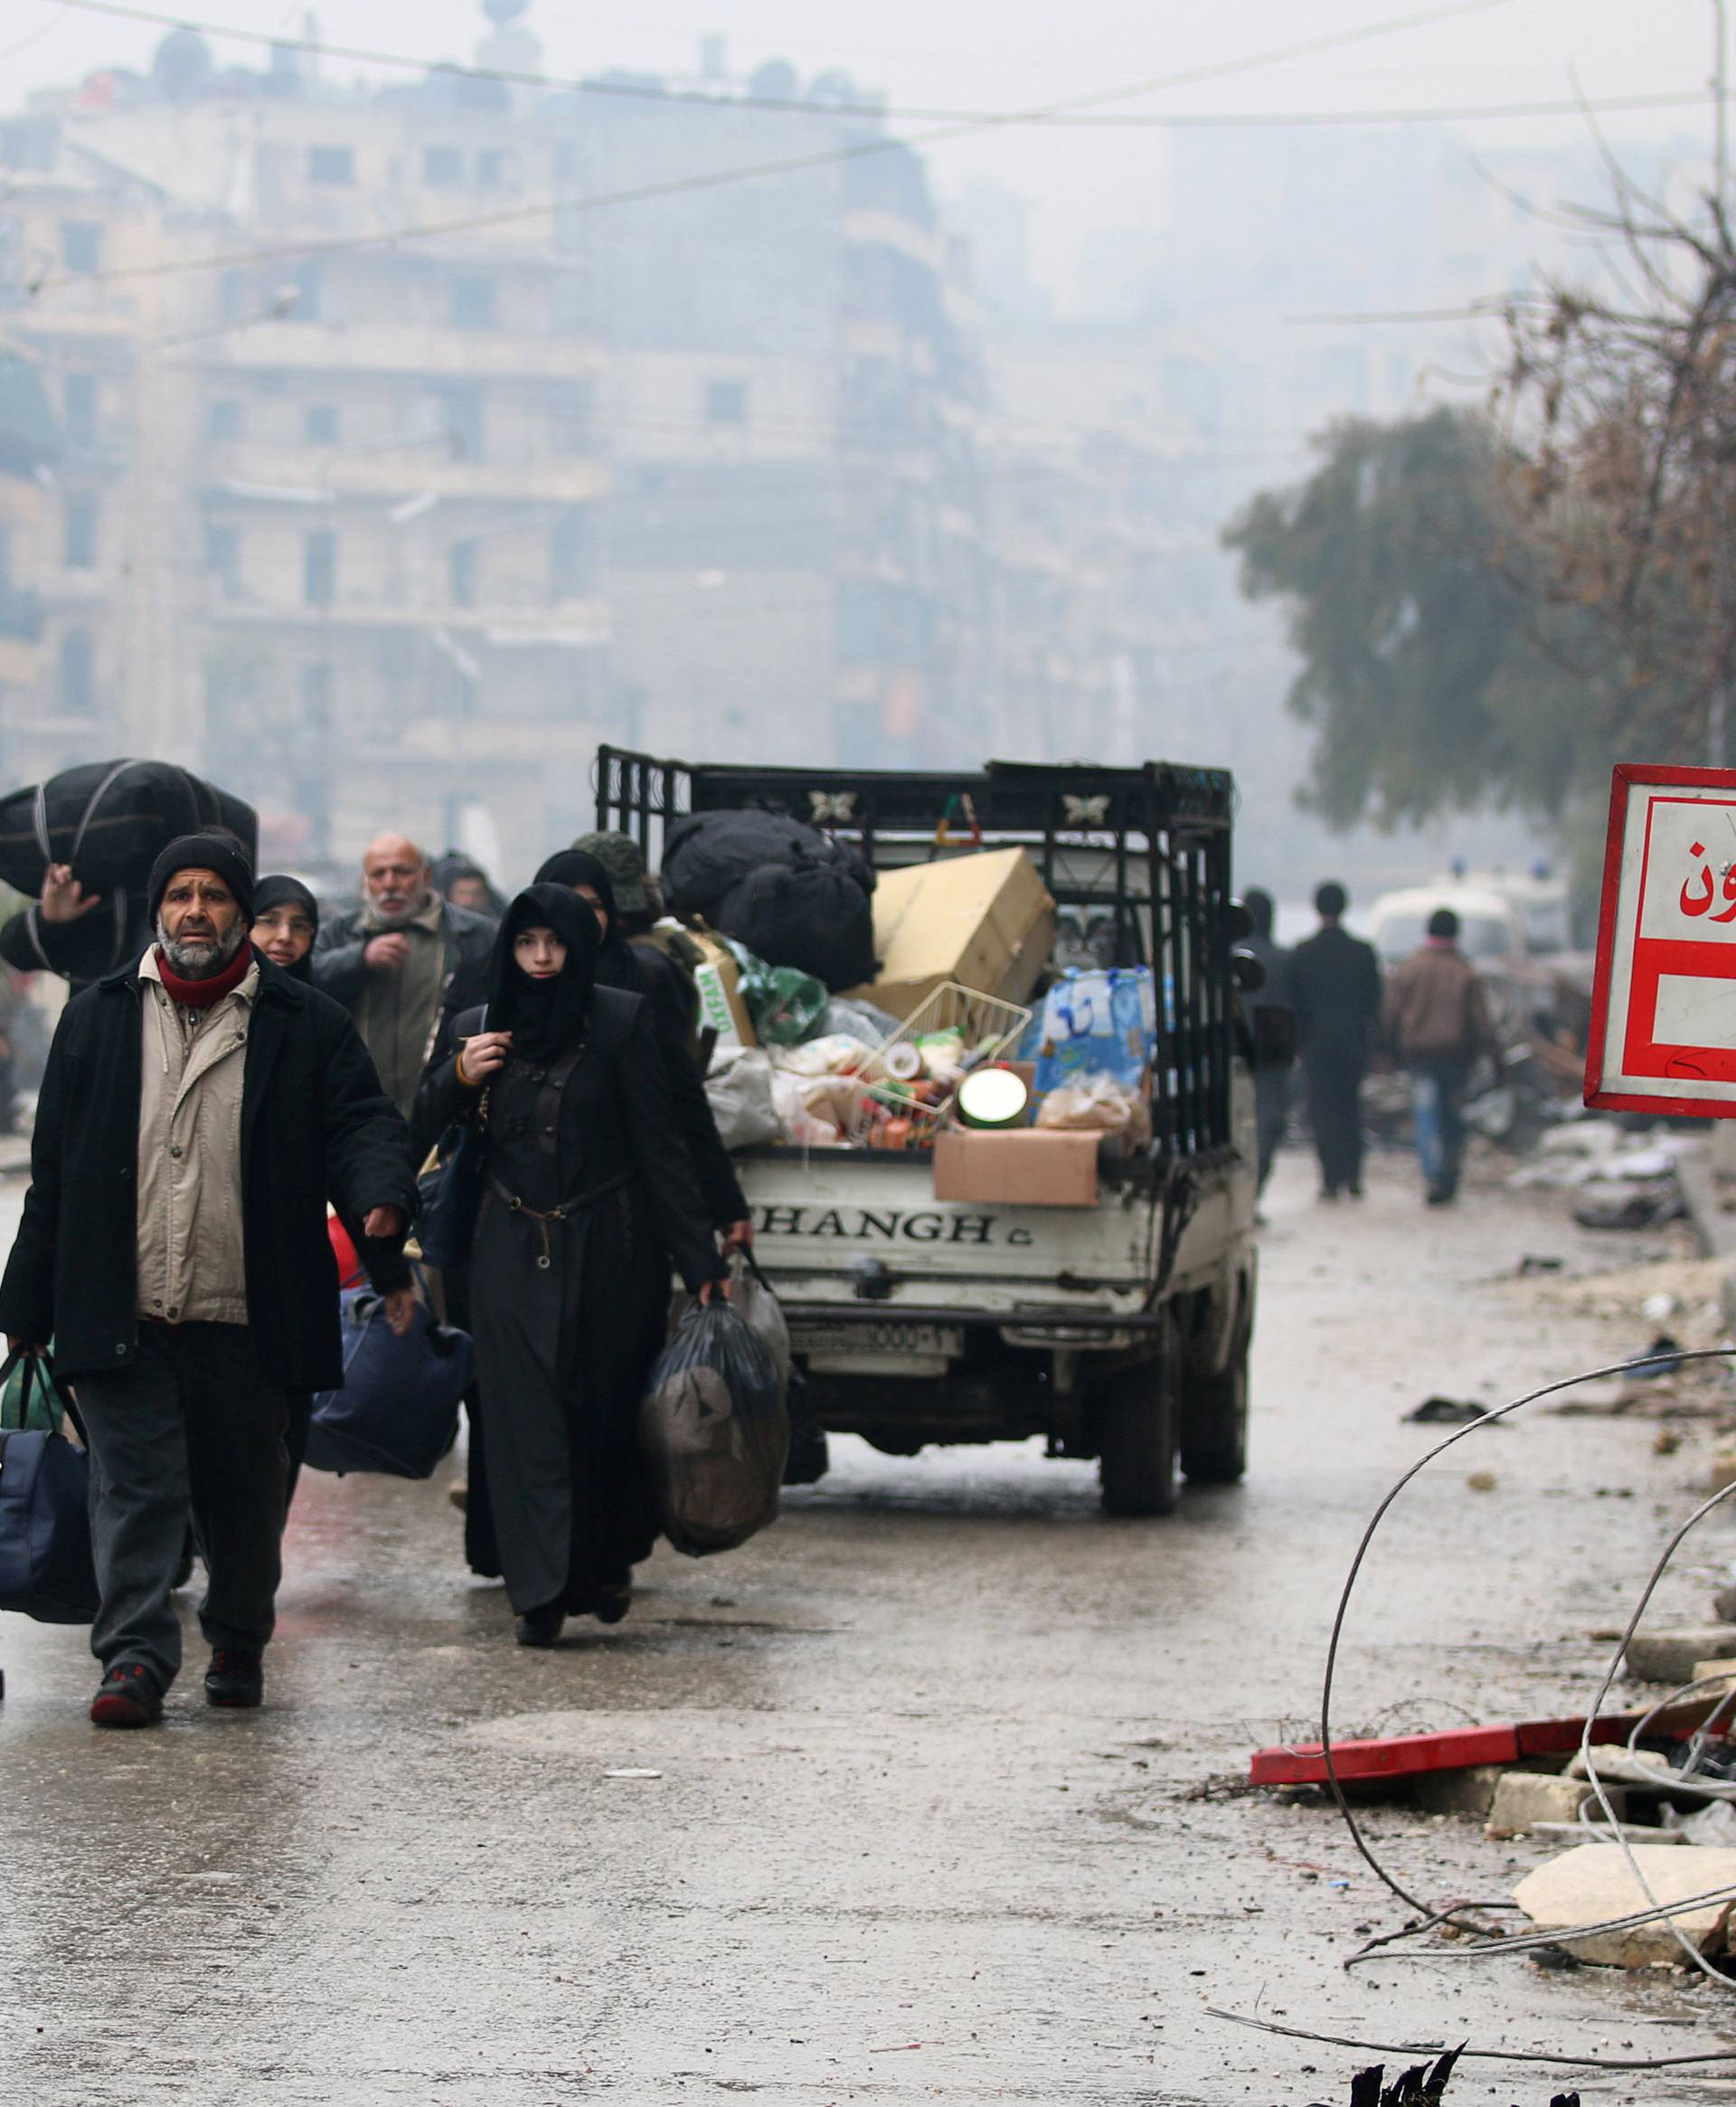 People carry their belongings as they flee deeper into the remaining rebel-held areas of Aleppo